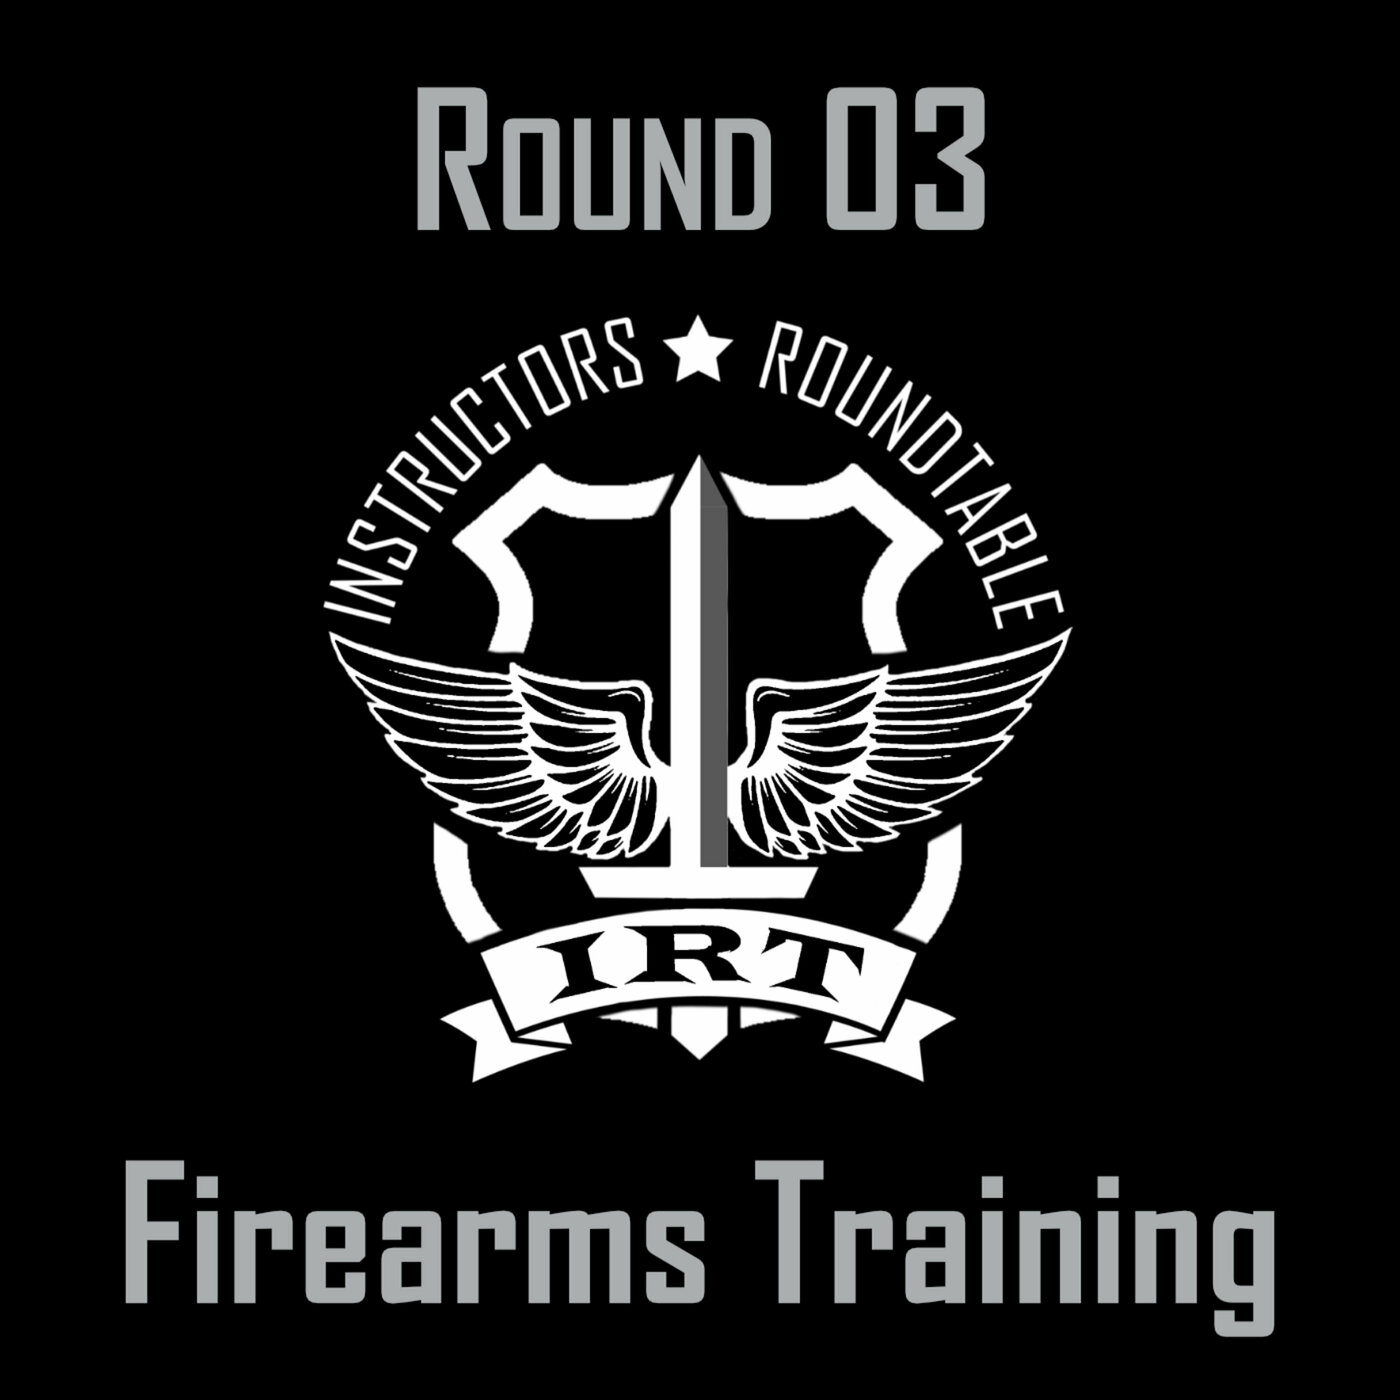 IRT - Round 03 - Firearms Training in Law Enforcement